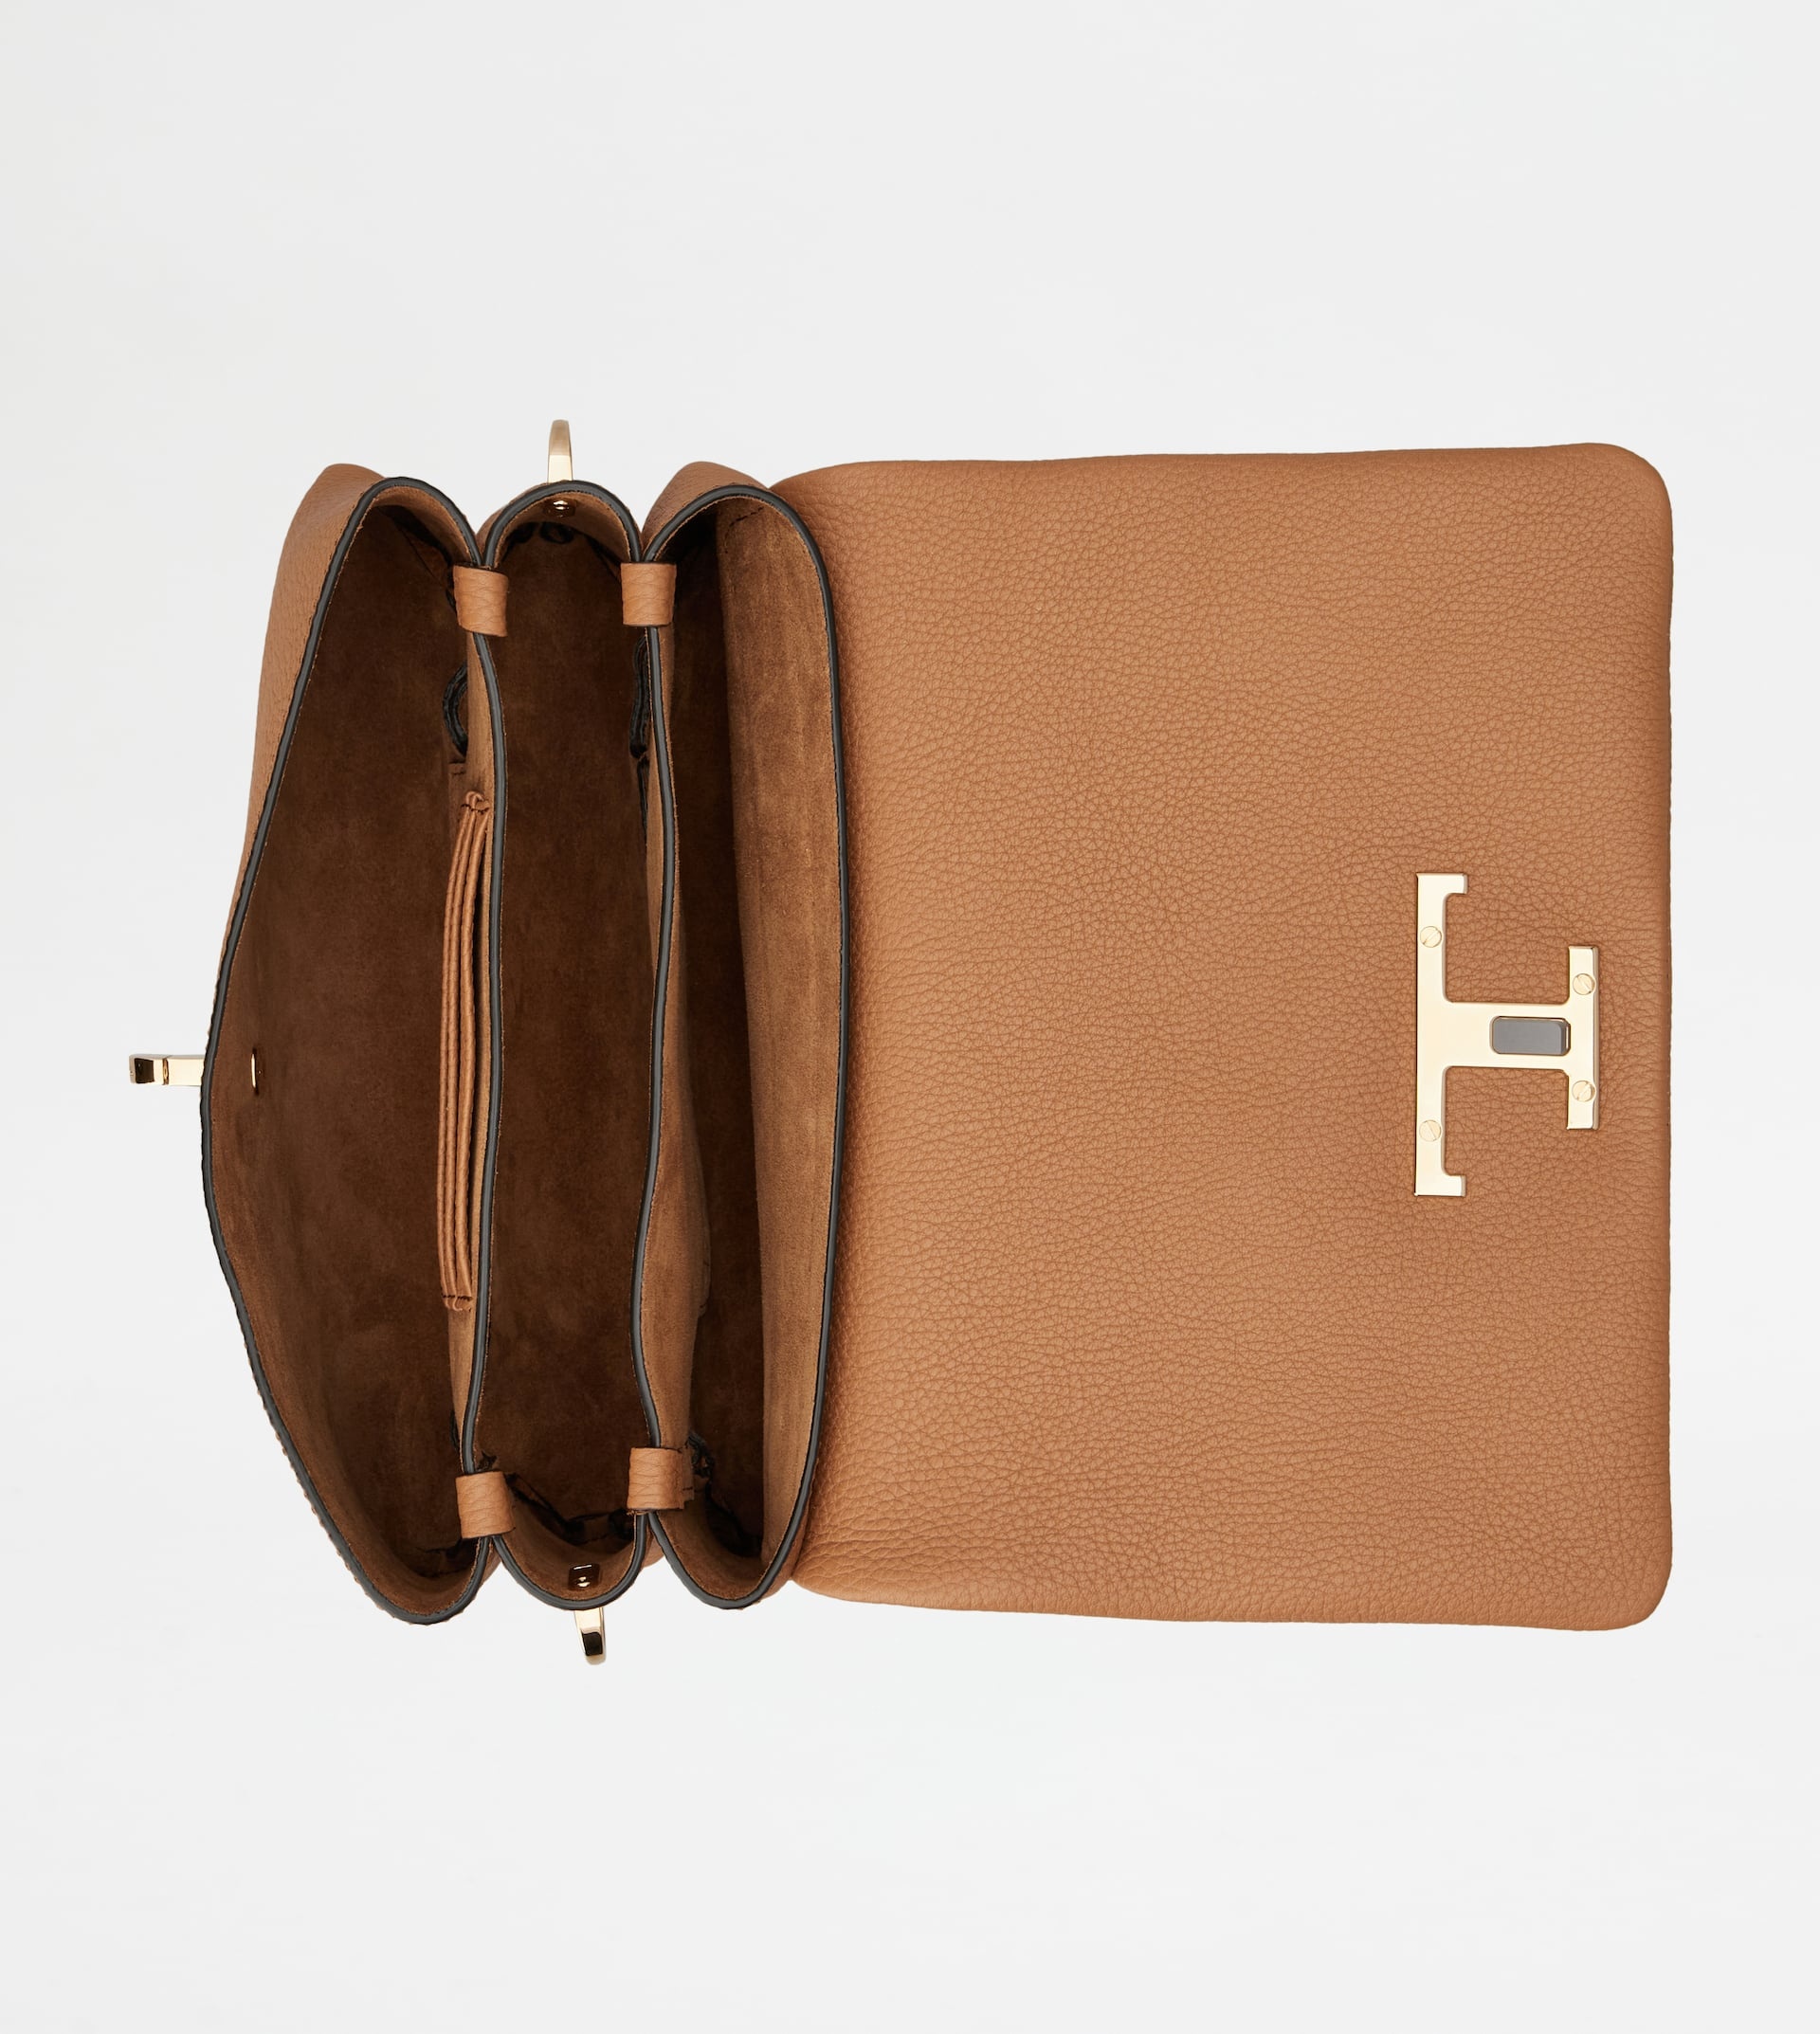 T TIMELESS FLAP BAG IN LEATHER MINI - BROWN - 4